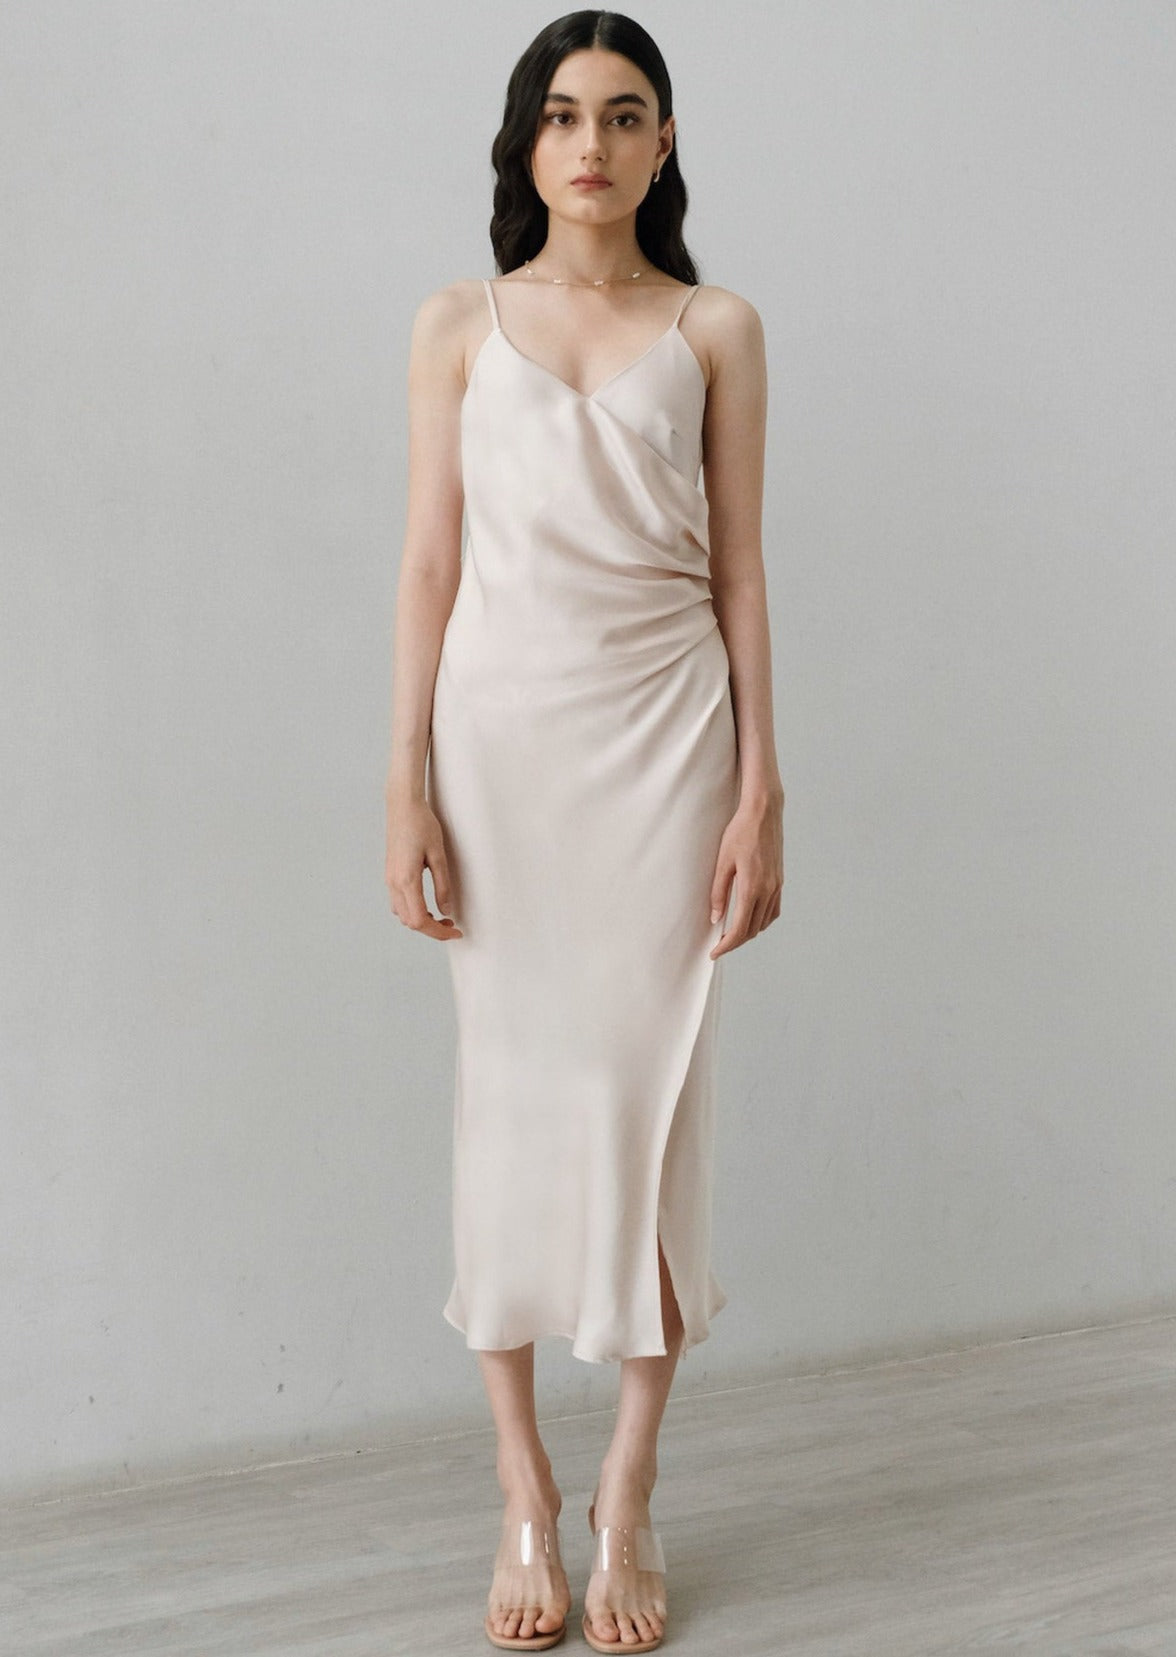 Caterina Dress In Champagne (3 Left)